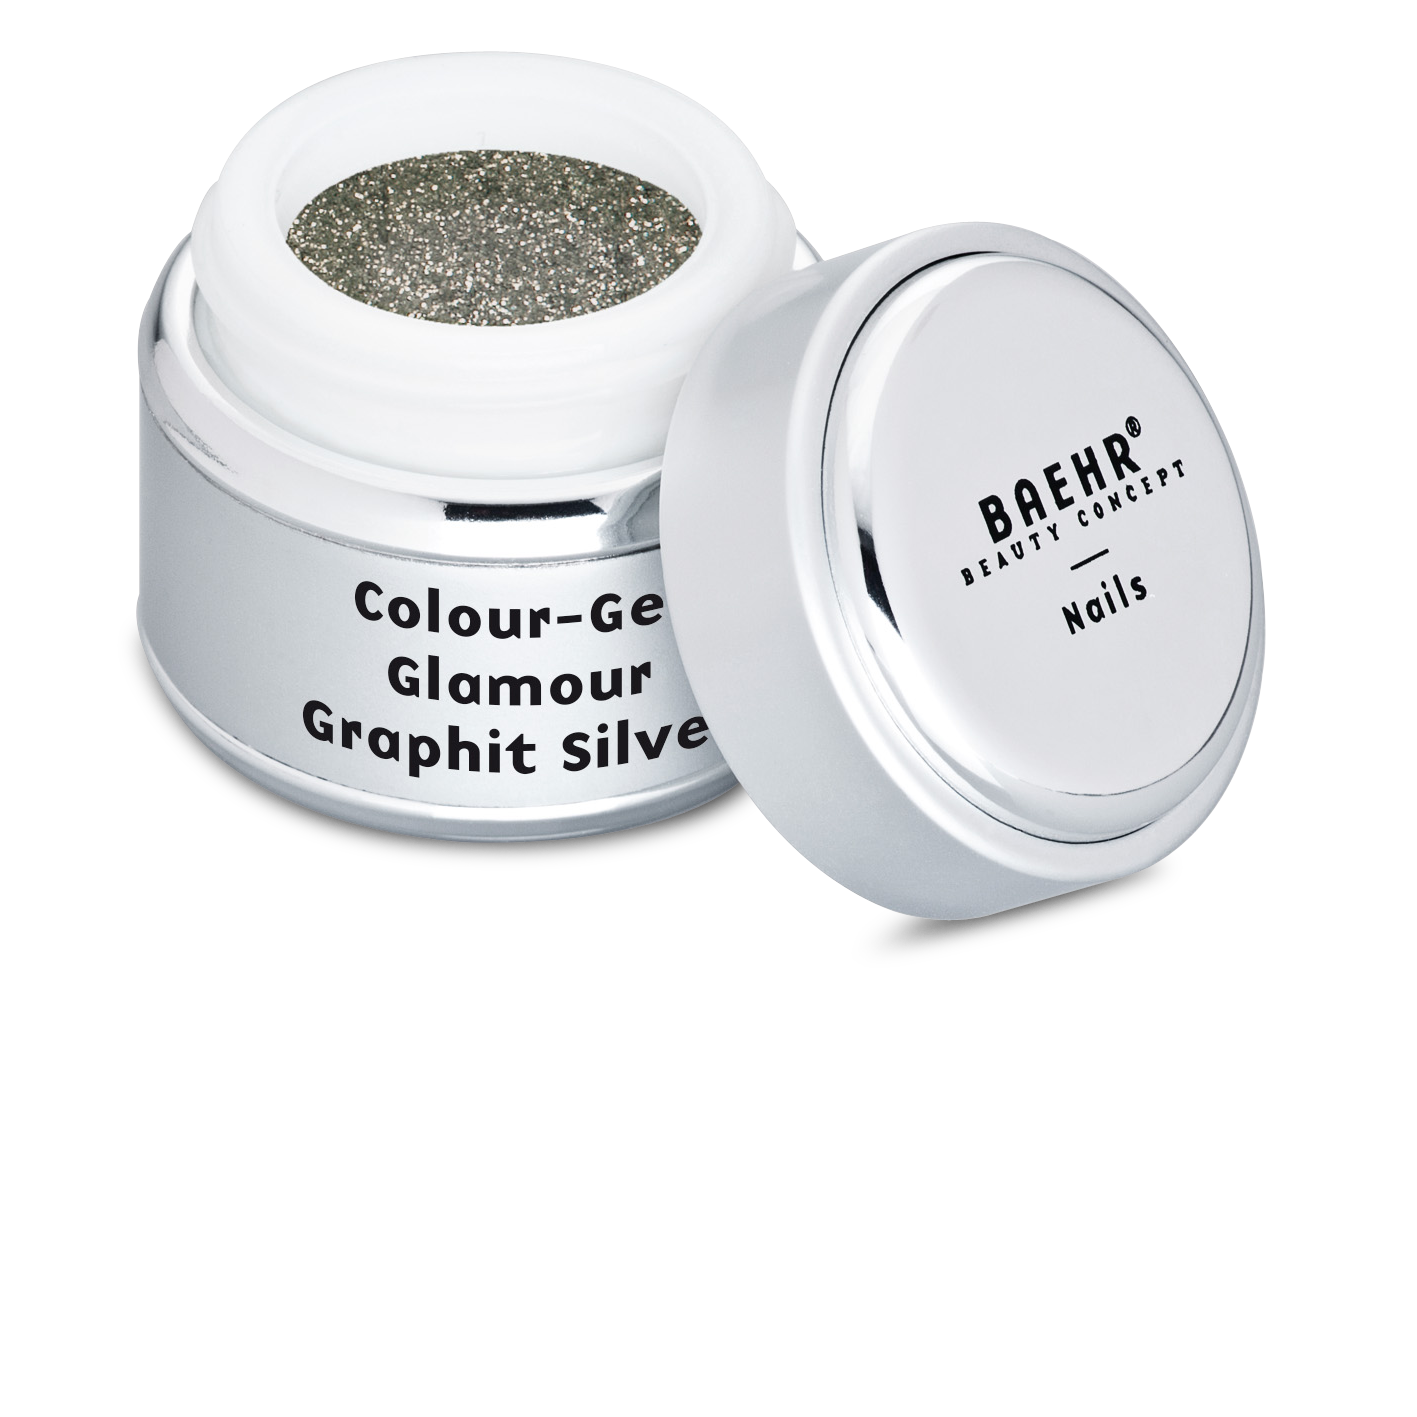 colour-gel-glamour-graphit-silver_26649